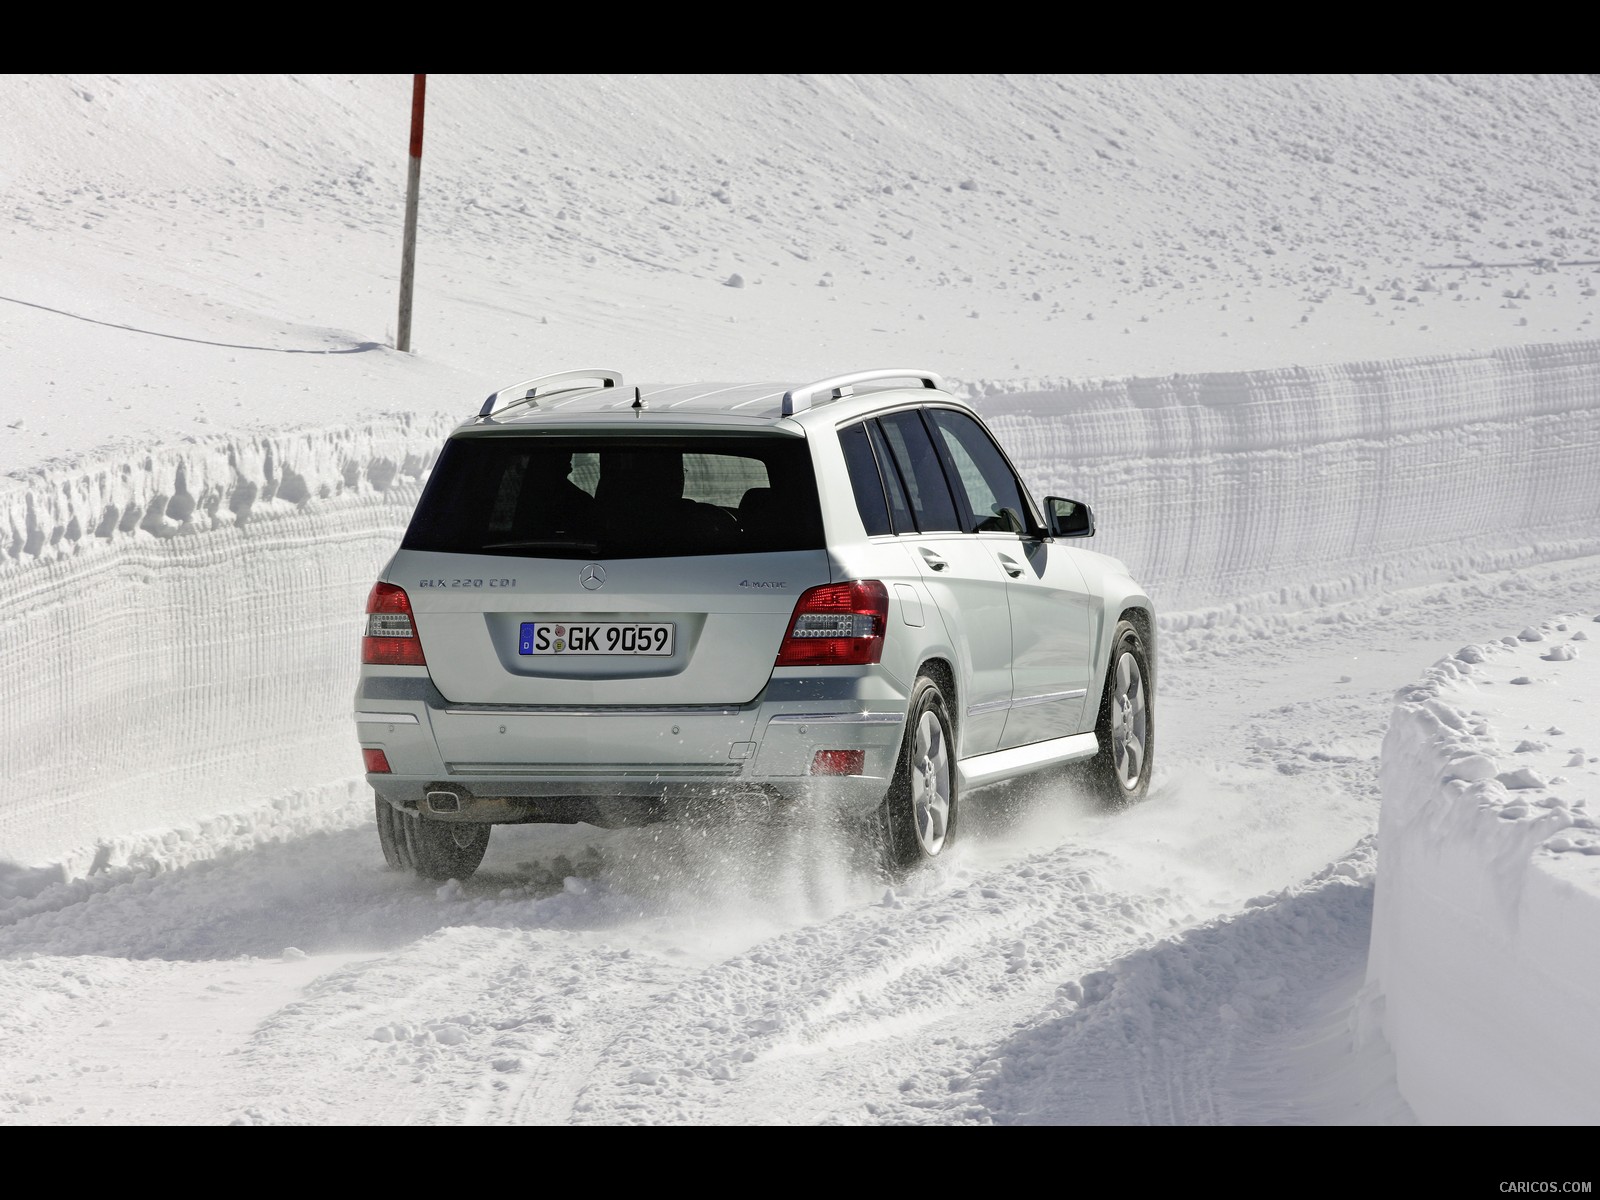 Mercedes-Benz GLK-Class - On Snow - Rear Angle , #42 of 351